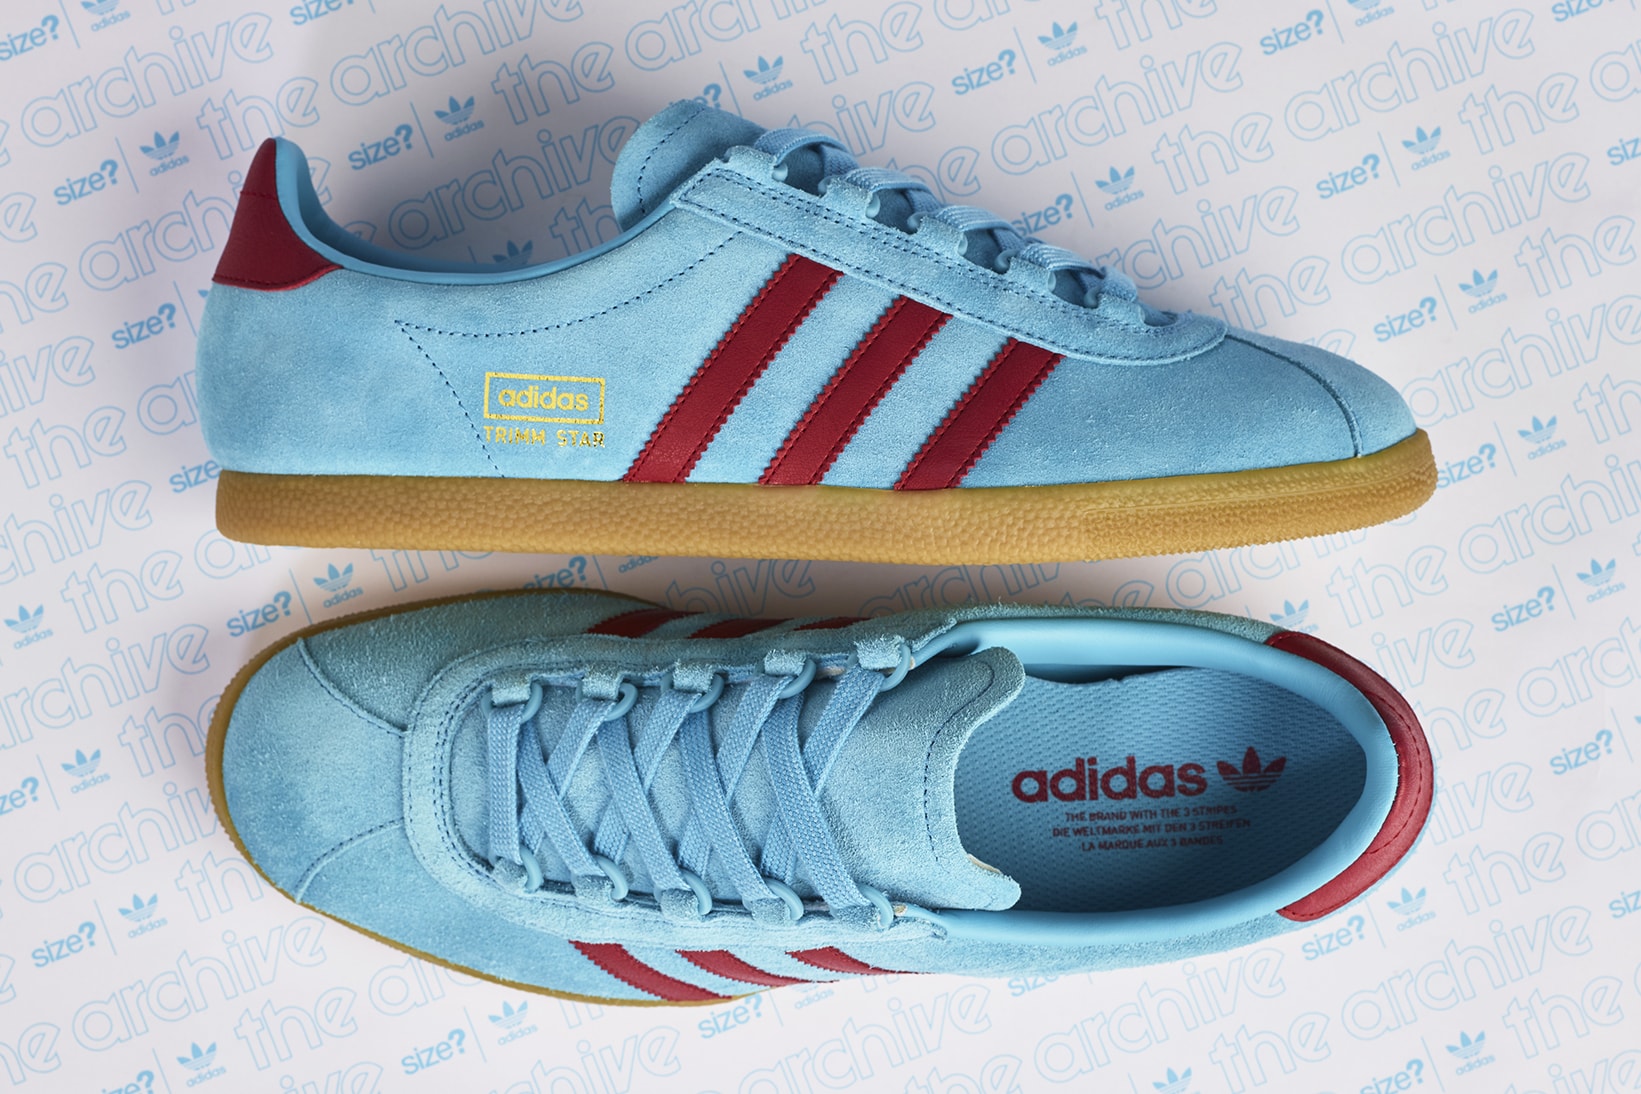 adidas Originals Archive Trimm Star Size? Release Details Footwear Shoes Kicks Trainers Sneakers Cop Buy Purchase Available Soon 2018 Friday 6 July